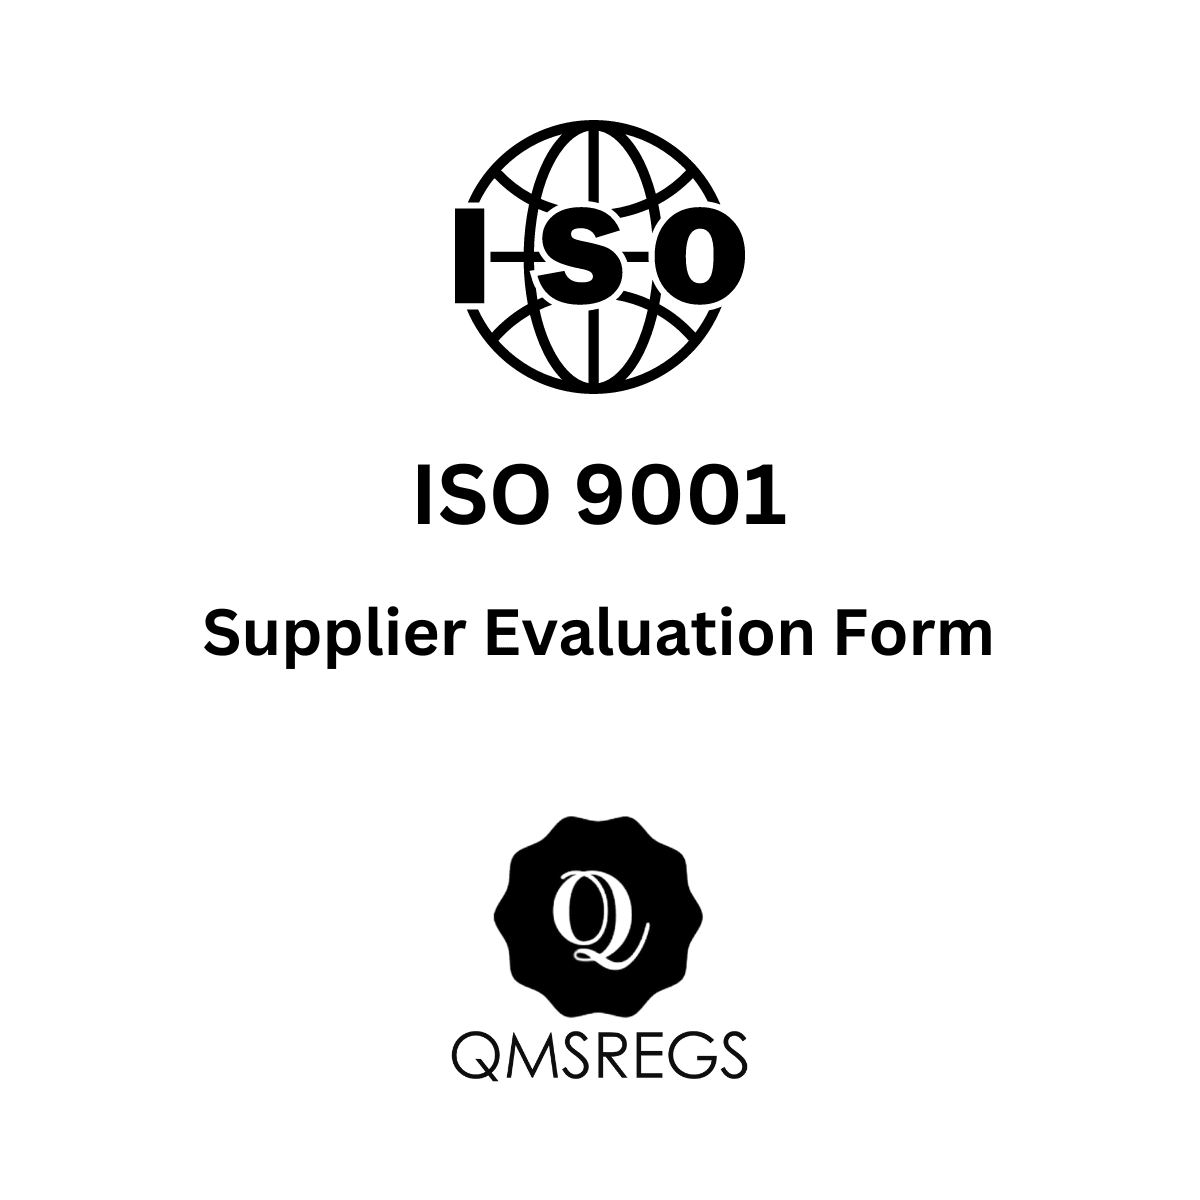 ISO 9001 Supplier Evaluation Form Template